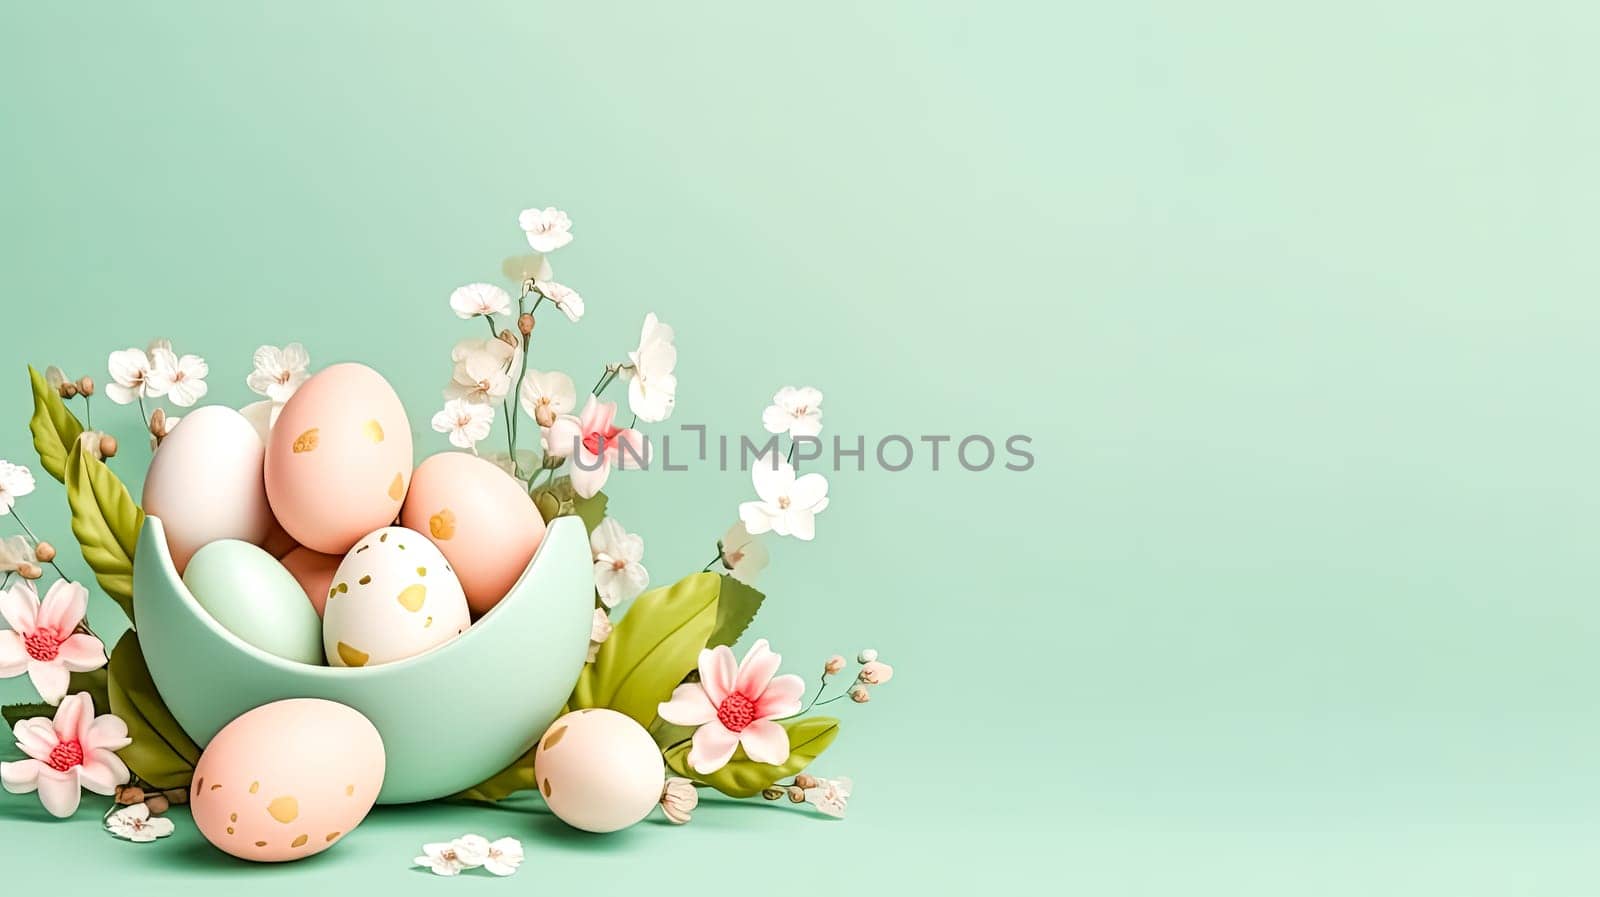 Basket of abundance, Easter eggs in a vibrant nest a delightful scene symbolizing the renewal and celebration of life during this festive season